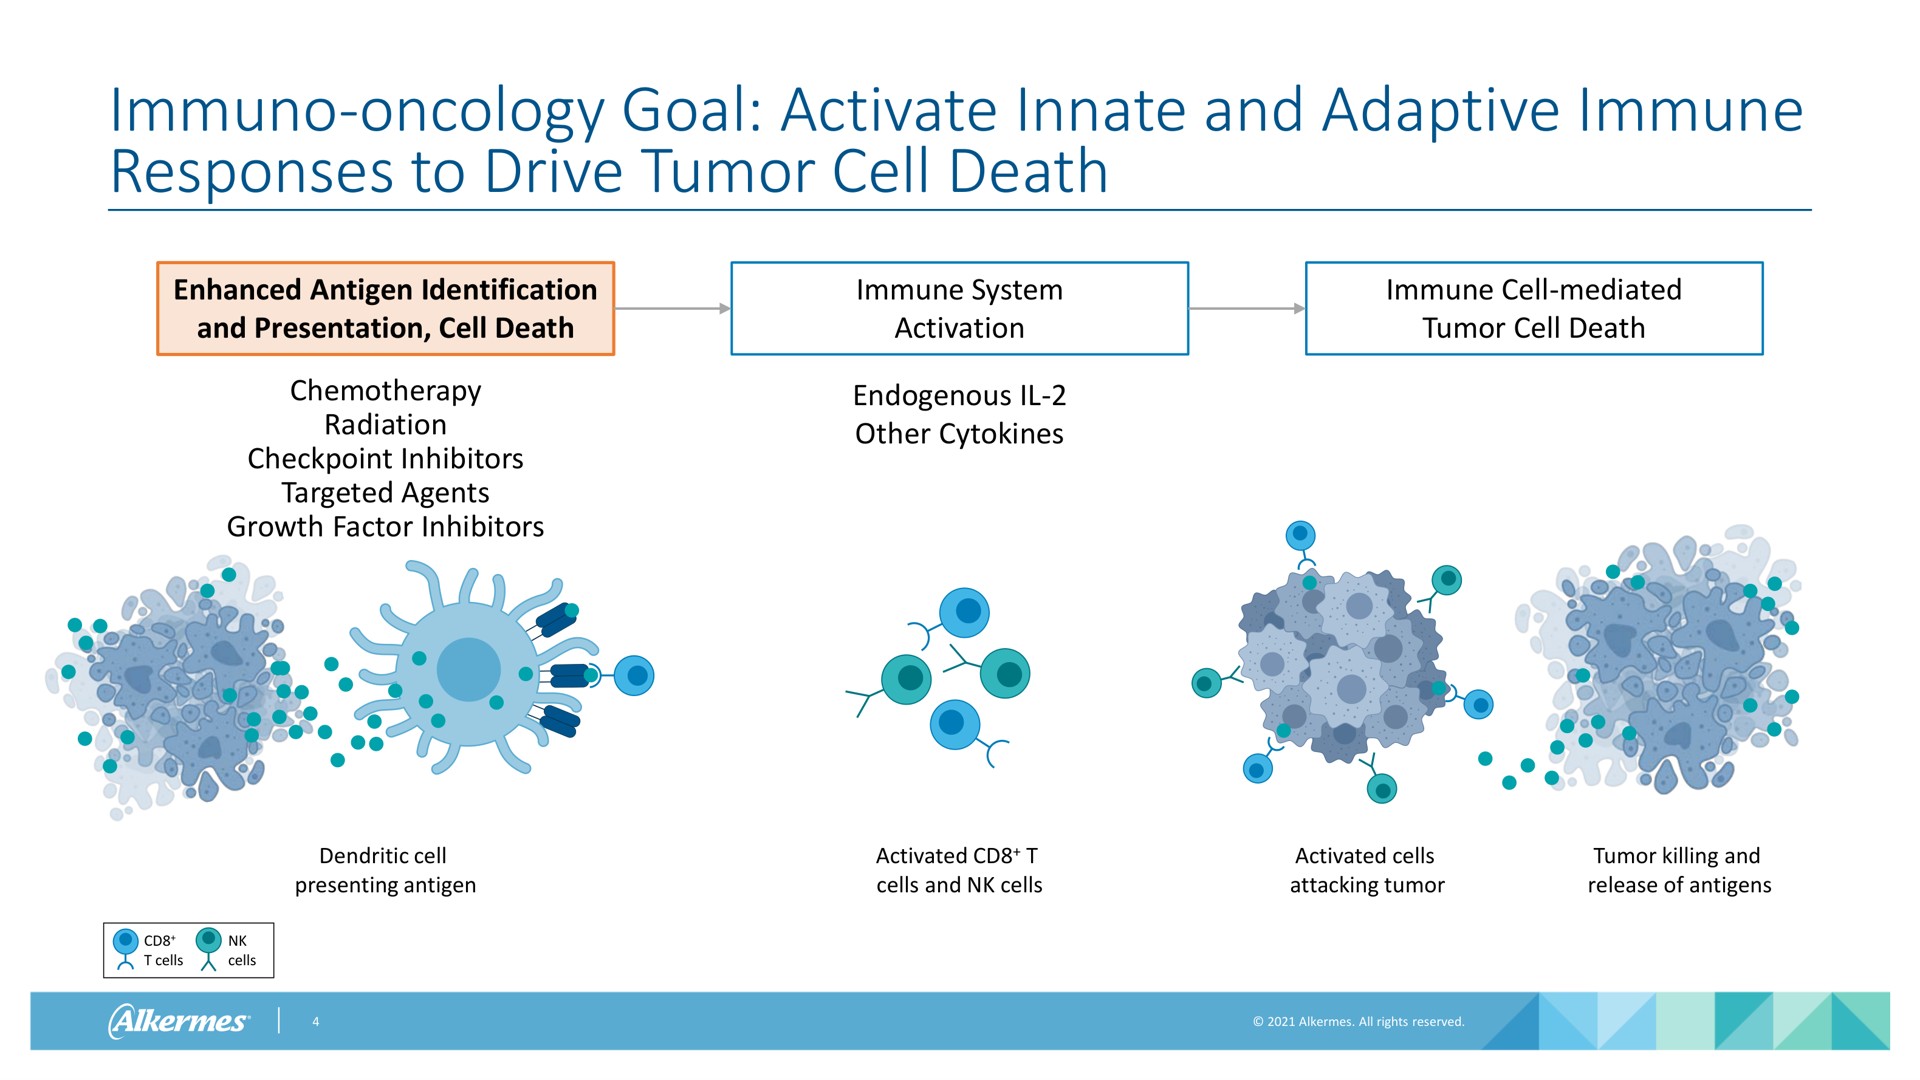 oncology goal activate innate and adaptive immune responses to drive tumor cell death enhanced antigen identification and presentation cell death chemotherapy radiation inhibitors targeted agents growth factor inhibitors immune system activation endogenous other immune cell mediated tumor cell death dendritic cell presenting antigen activated cells and cells activated cells attacking tumor tumor killing and release of antigens cells cells aes | Alkermes